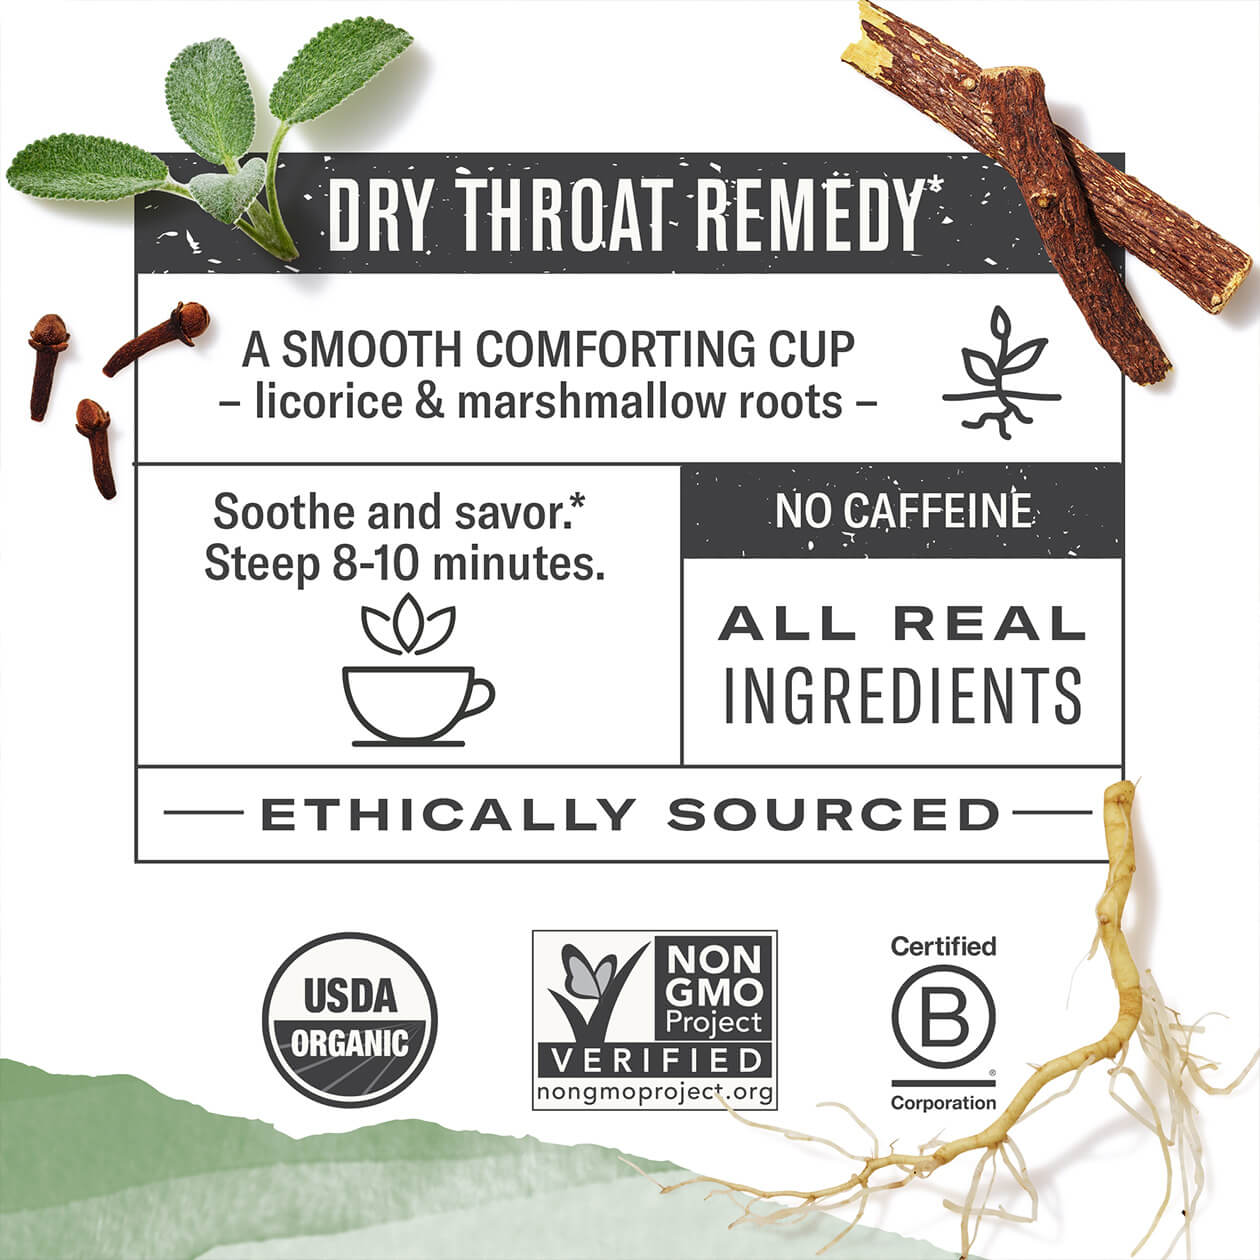 Infographic about Throat Soother: steep 8-10 minutes, caffeine free, all real ingredients, ethically sourced